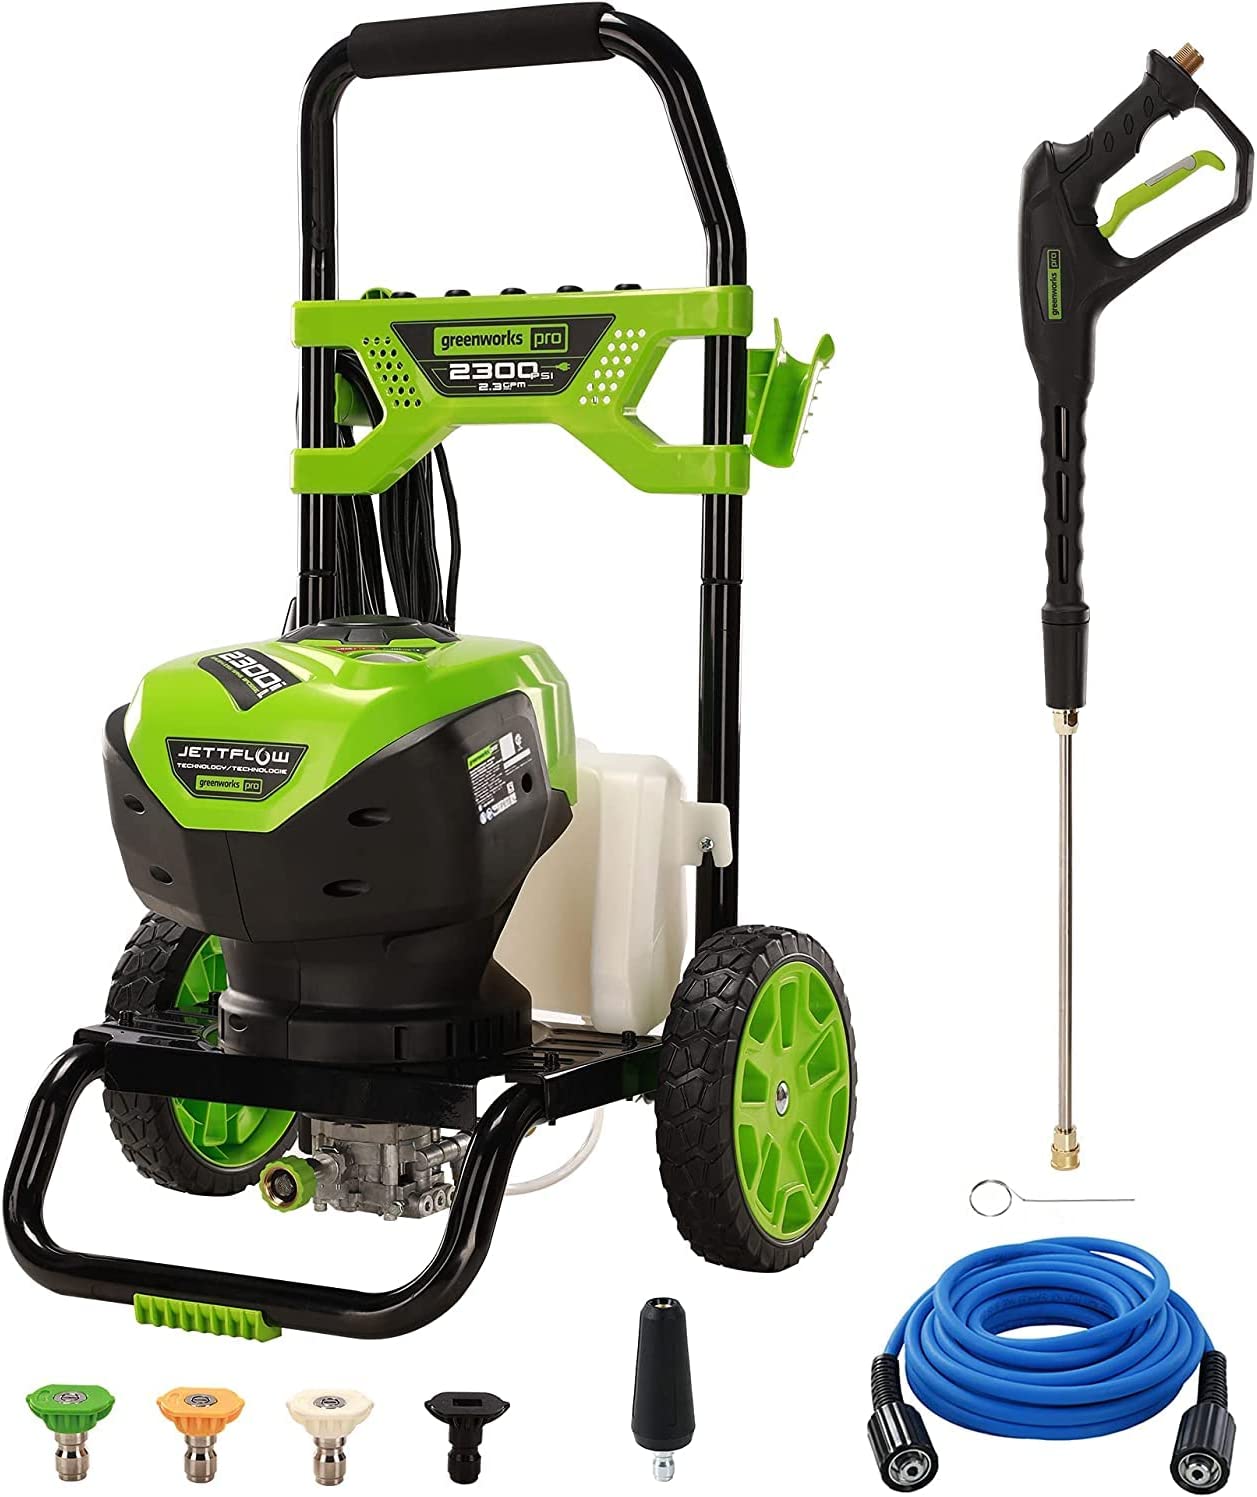 Greenworks PRO 2300 PSI Electric Pressure Washer Review